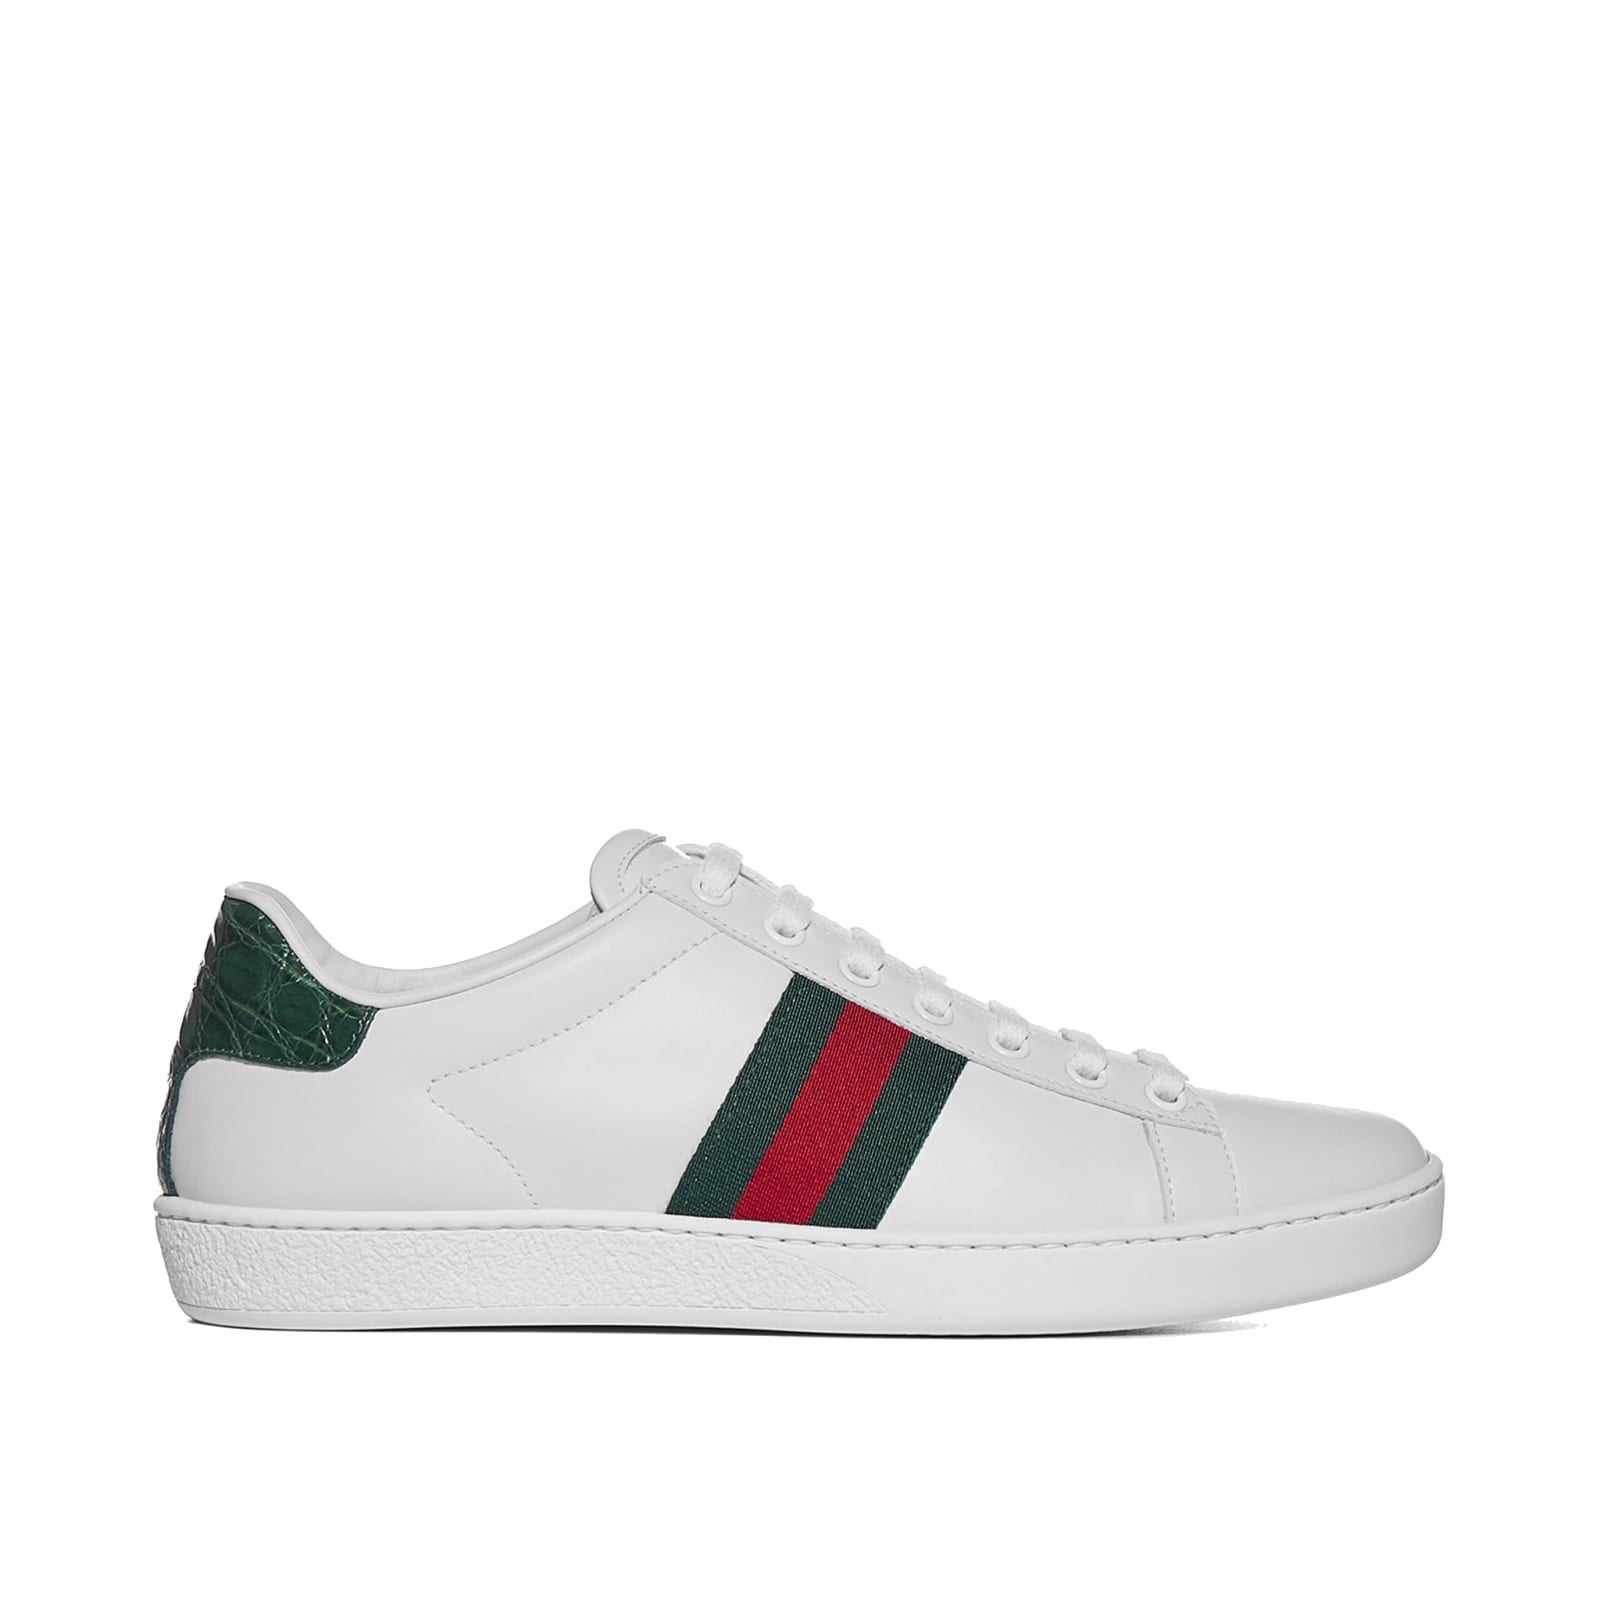 Gucci Leather Ace Sneakers